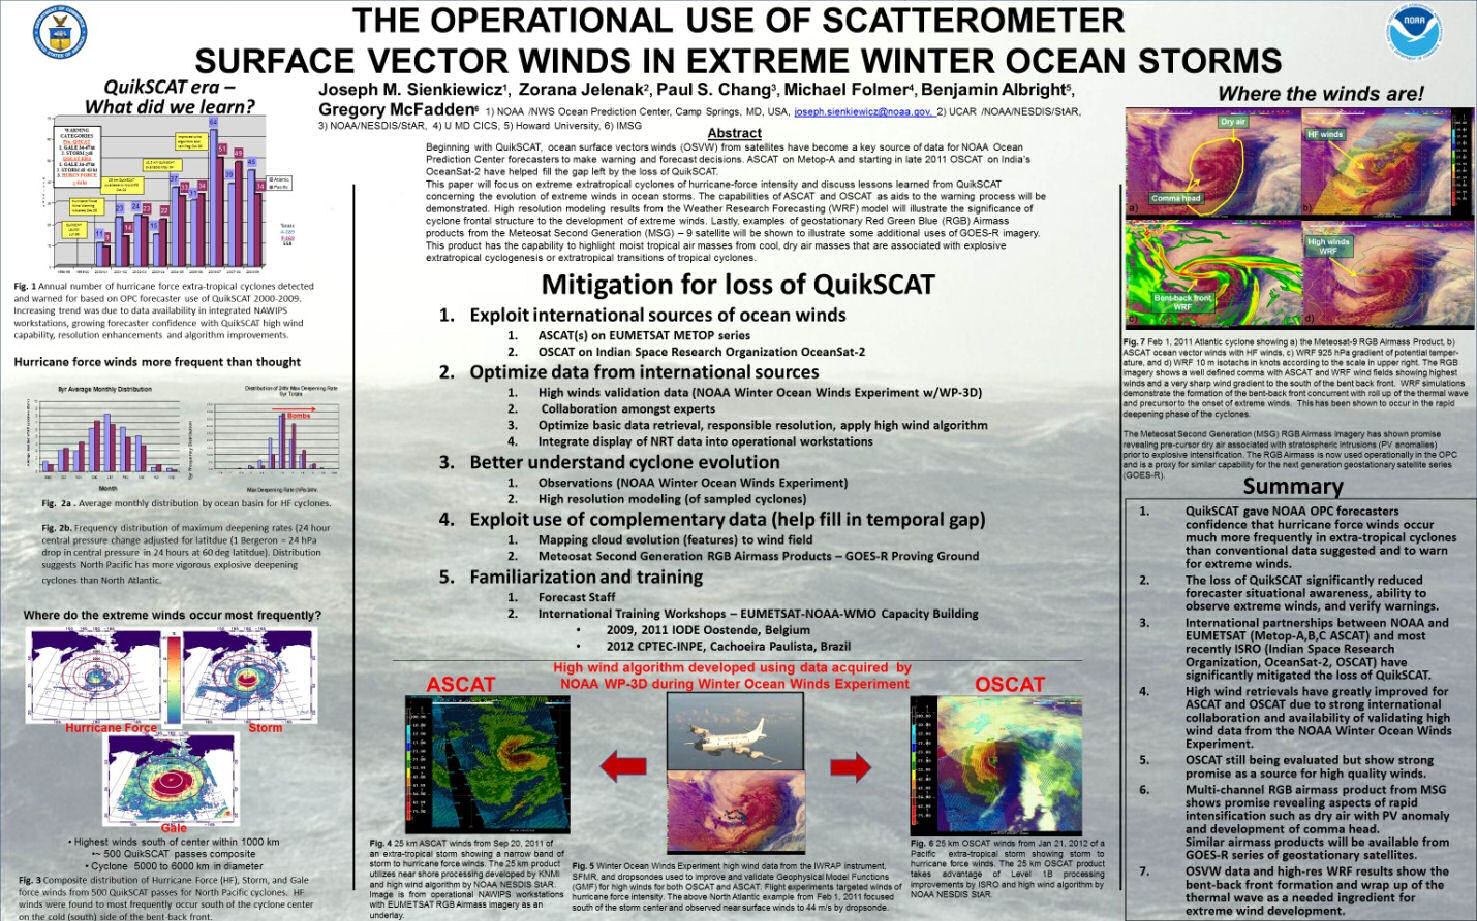 The application of satellite remote sensed ocean surface vector winds for marine warnings and forecasts.
